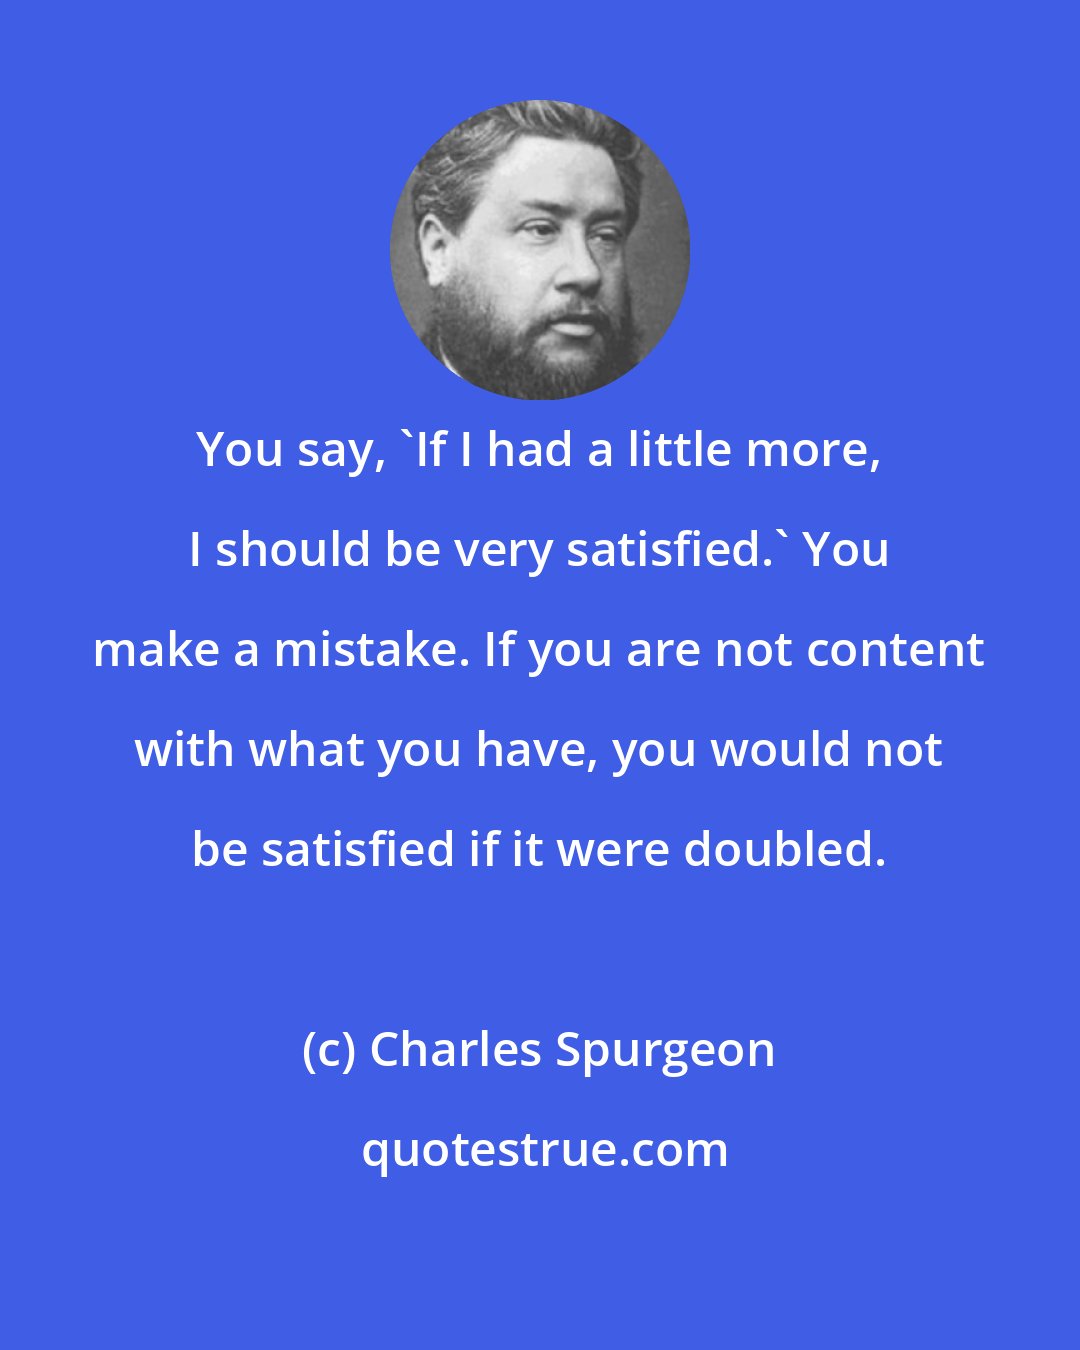 Charles Spurgeon: You say, 'If I had a little more, I should be very satisfied.' You make a mistake. If you are not content with what you have, you would not be satisfied if it were doubled.